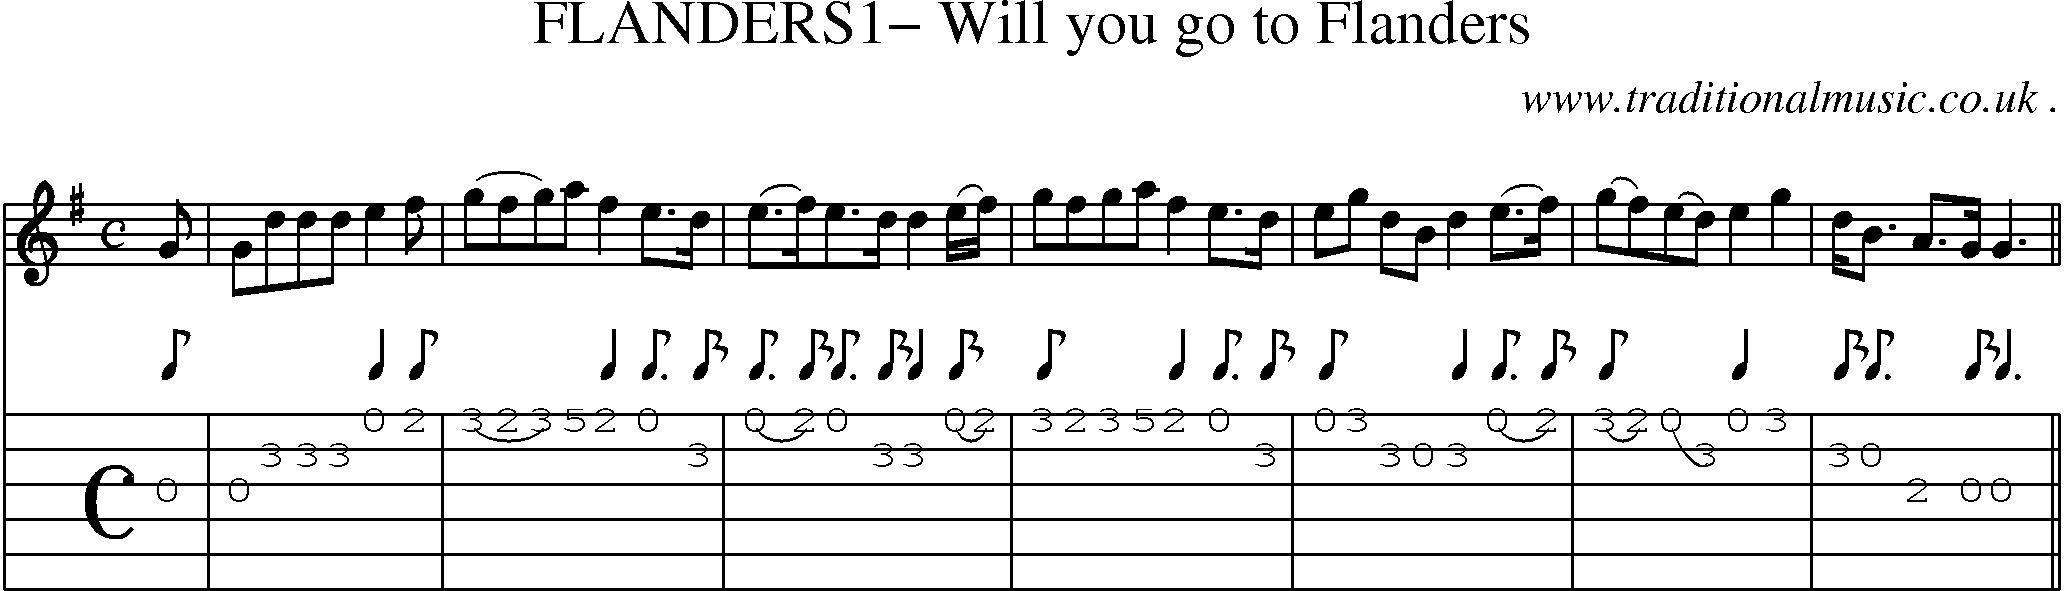 Sheet-Music and Guitar Tabs for Flanders1 Will You Go To Flanders